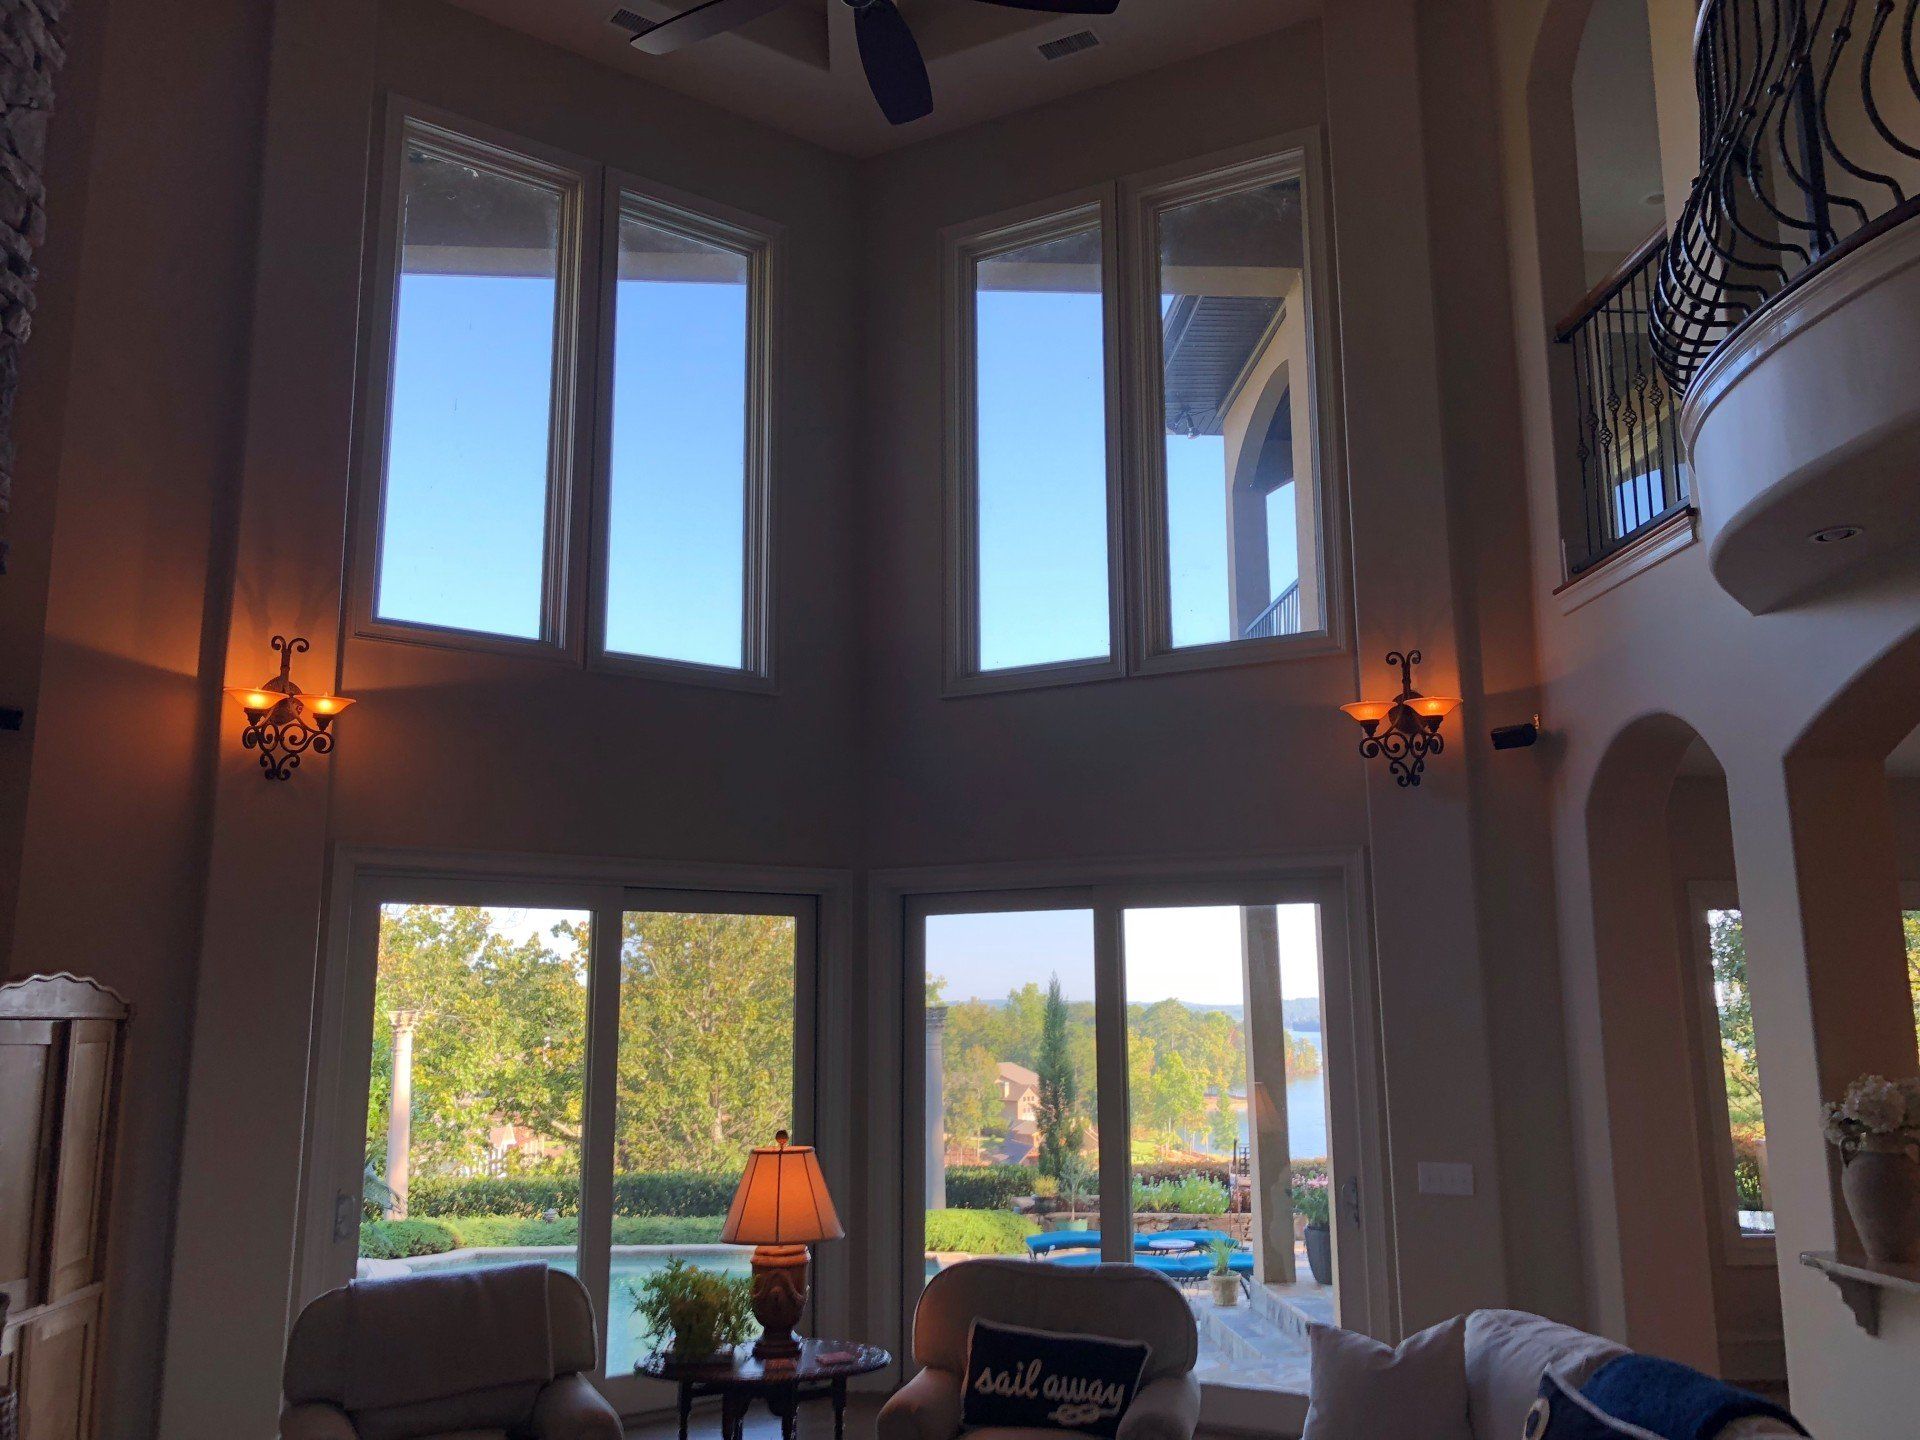 View looking out Lake Martin Home windows before tint installation.